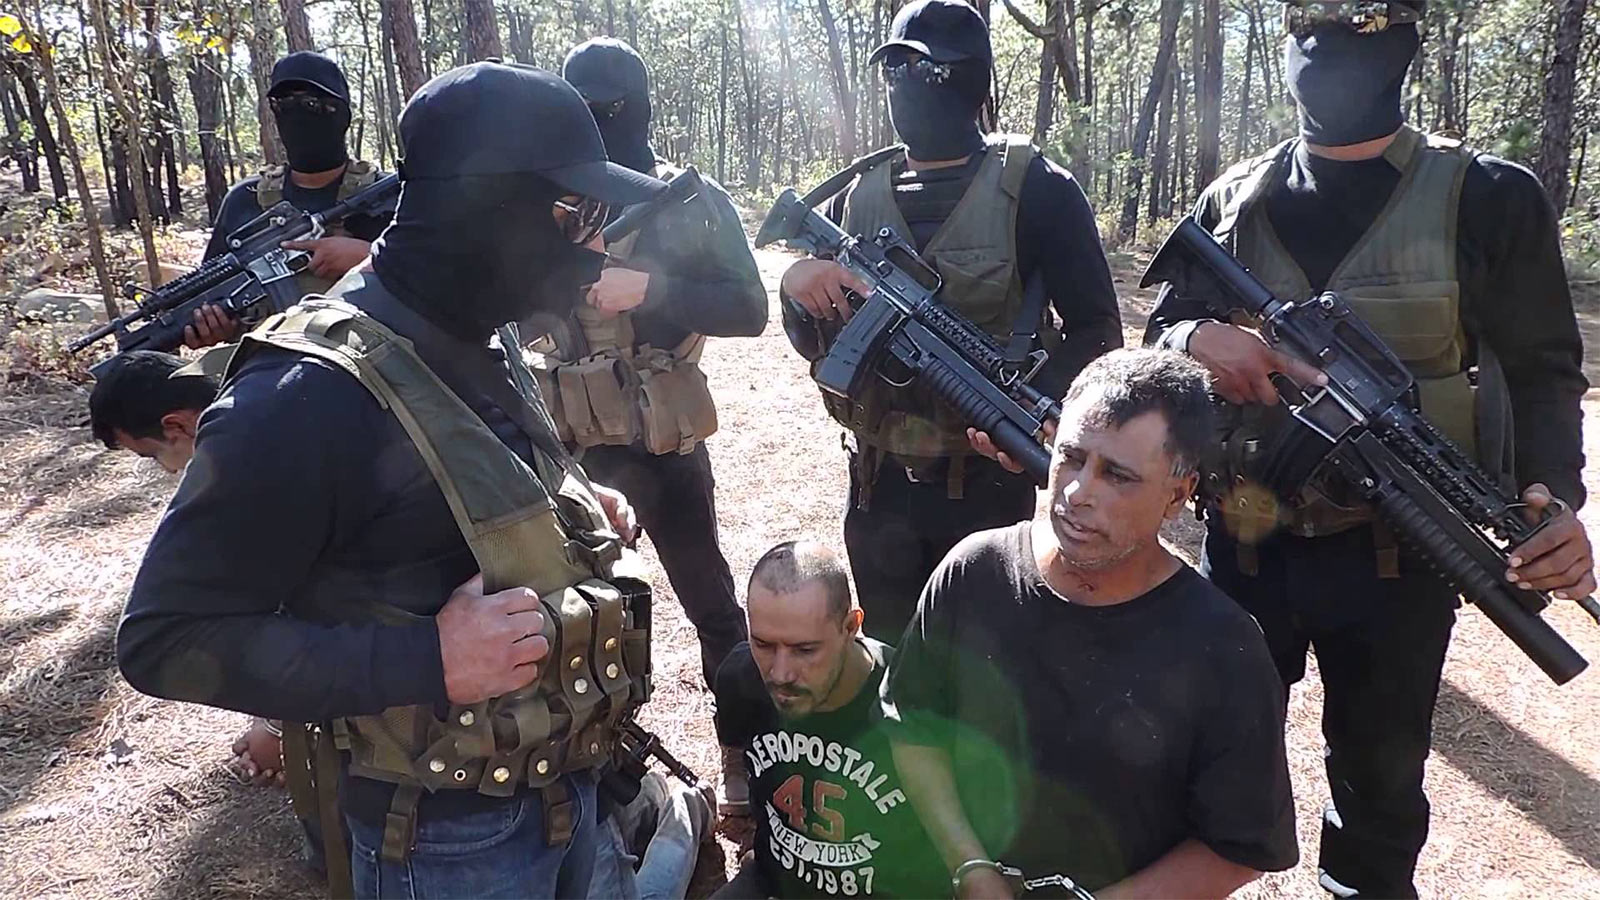 Members of the Jalisco New Generation cartel (CJNG) record themselves with prisoners from a rival cartel.